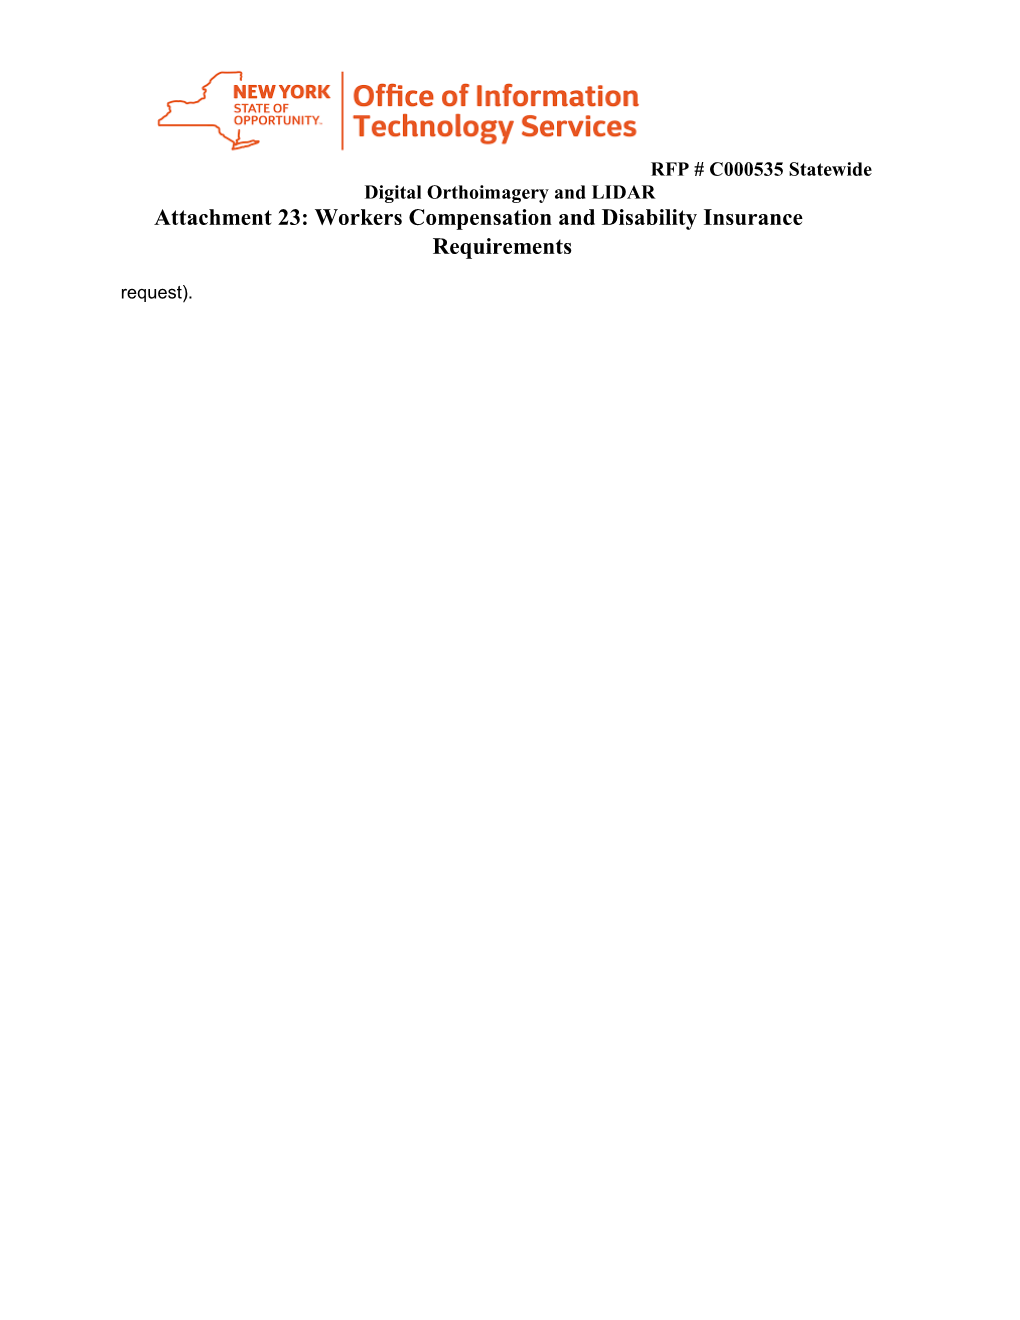 RFP # C000535statewide Digital Orthoimagery and LIDAR